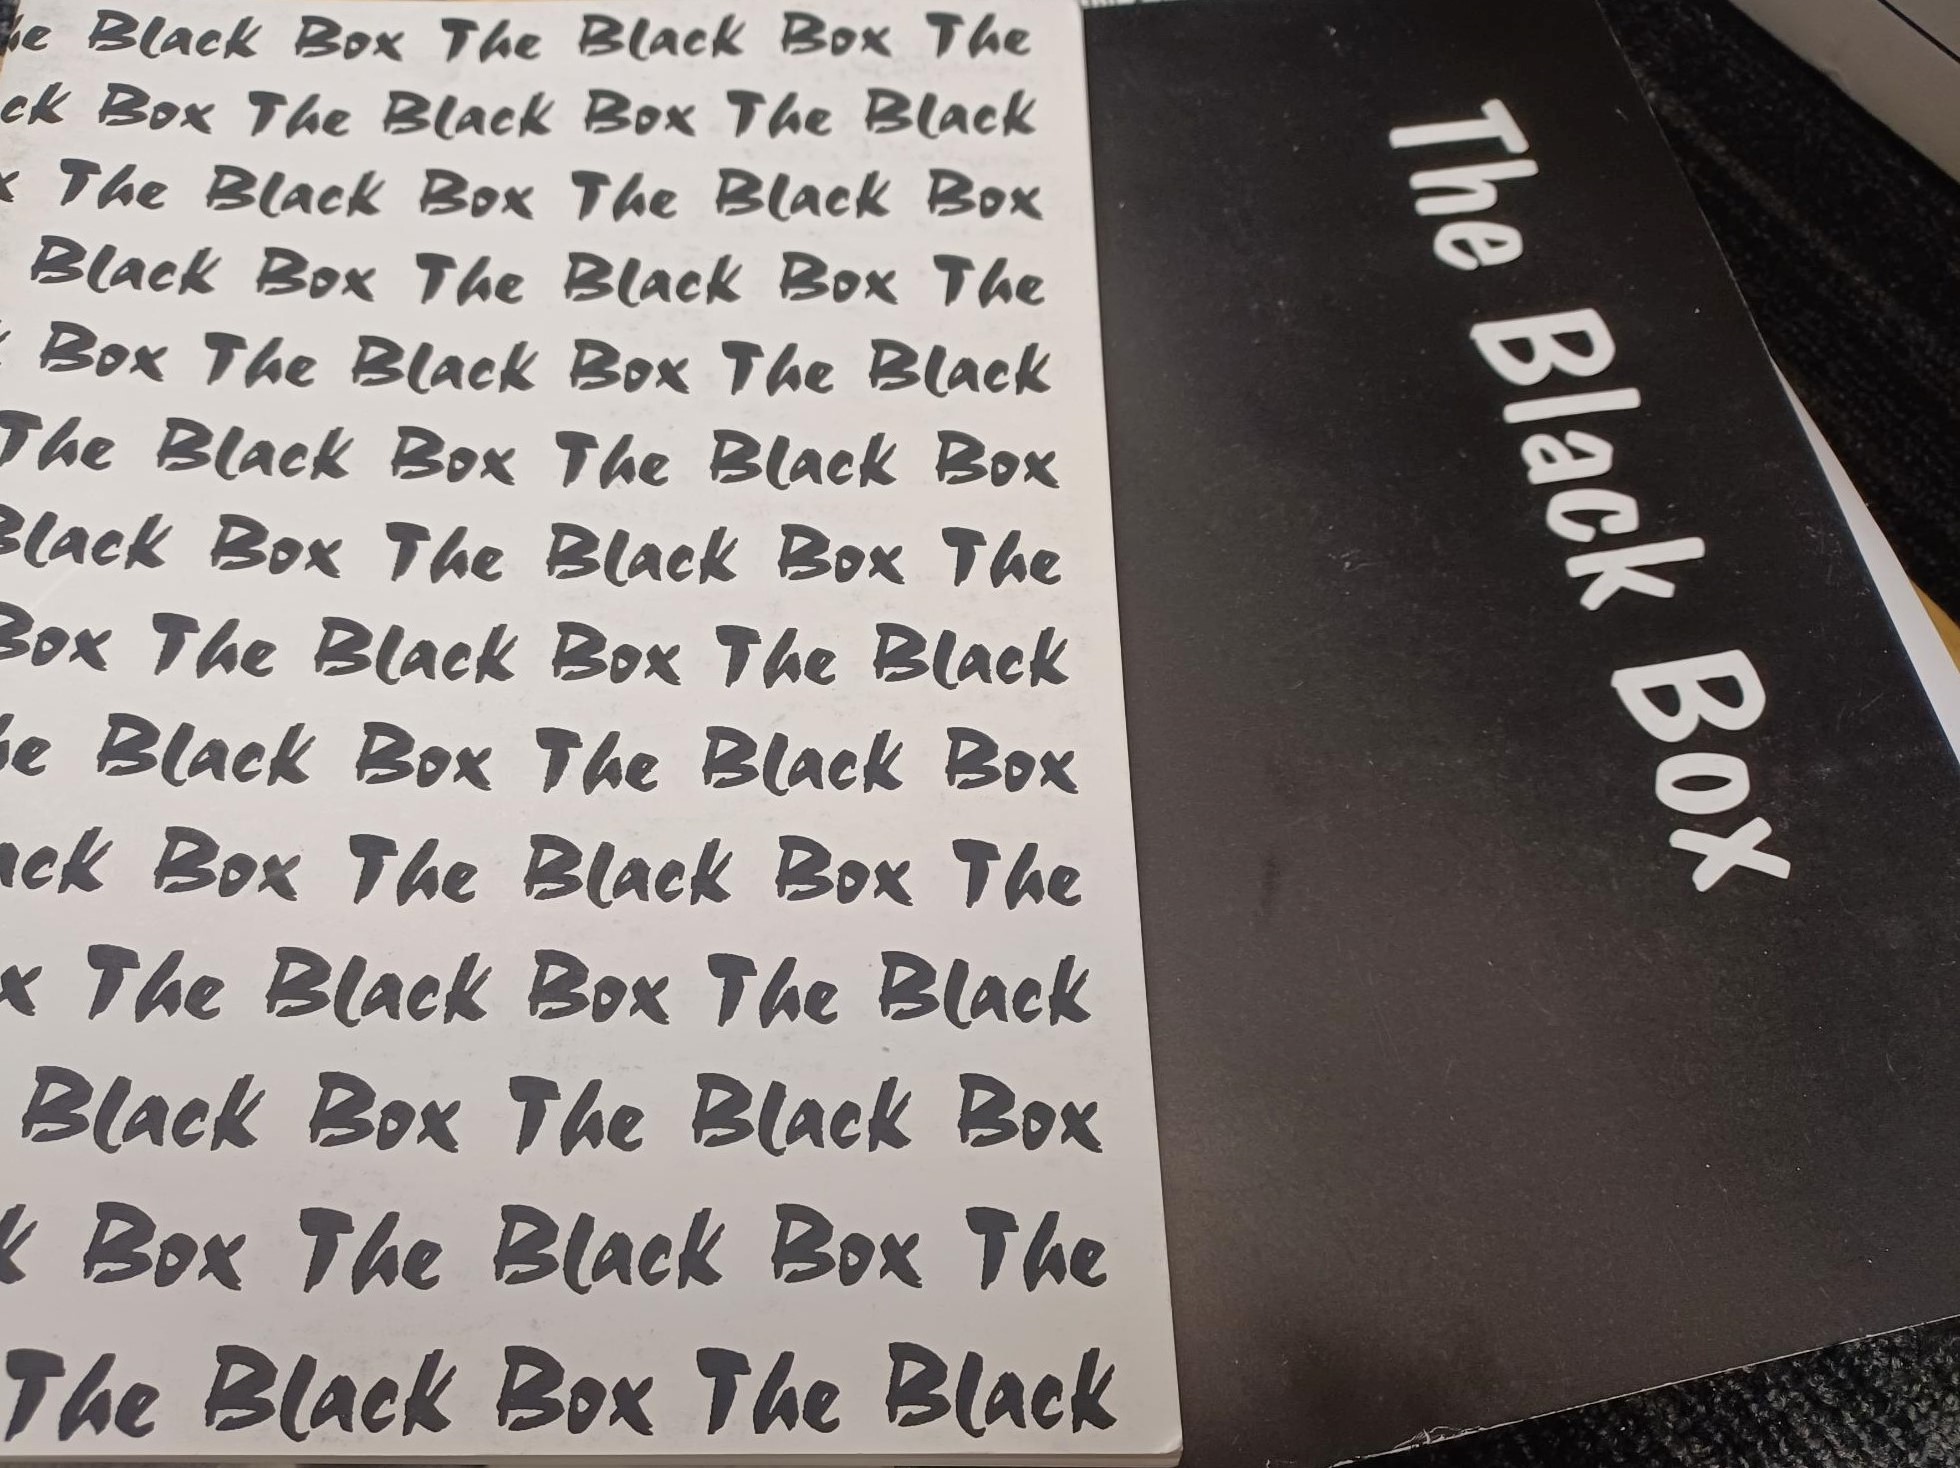 Photo of two black-and-white print copies of The Black Box magazine; both have simple, monochrome typographical designs.